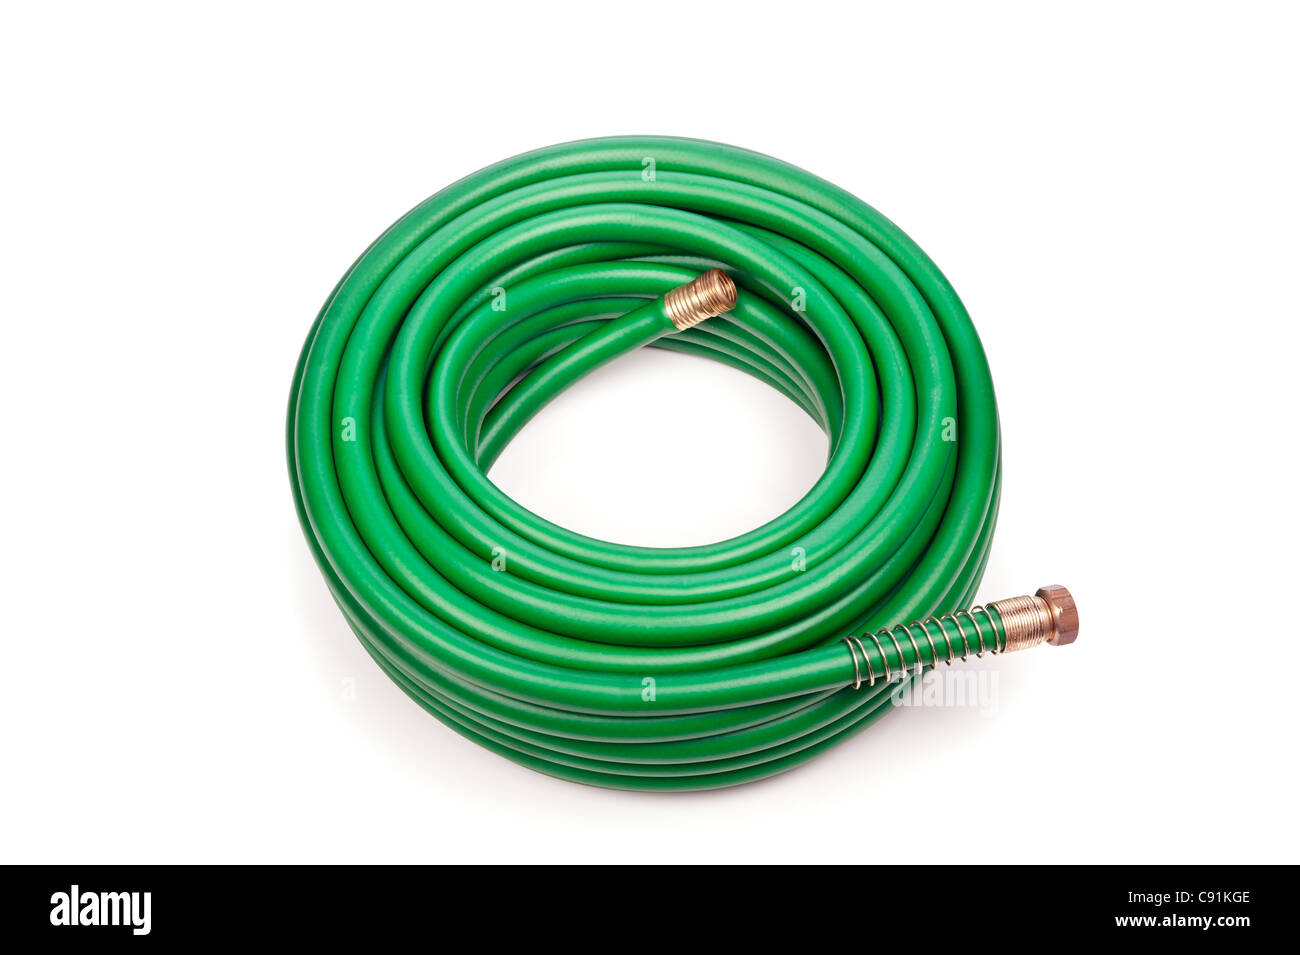 A new green coiled rubber hose on a white background. Stock Photo